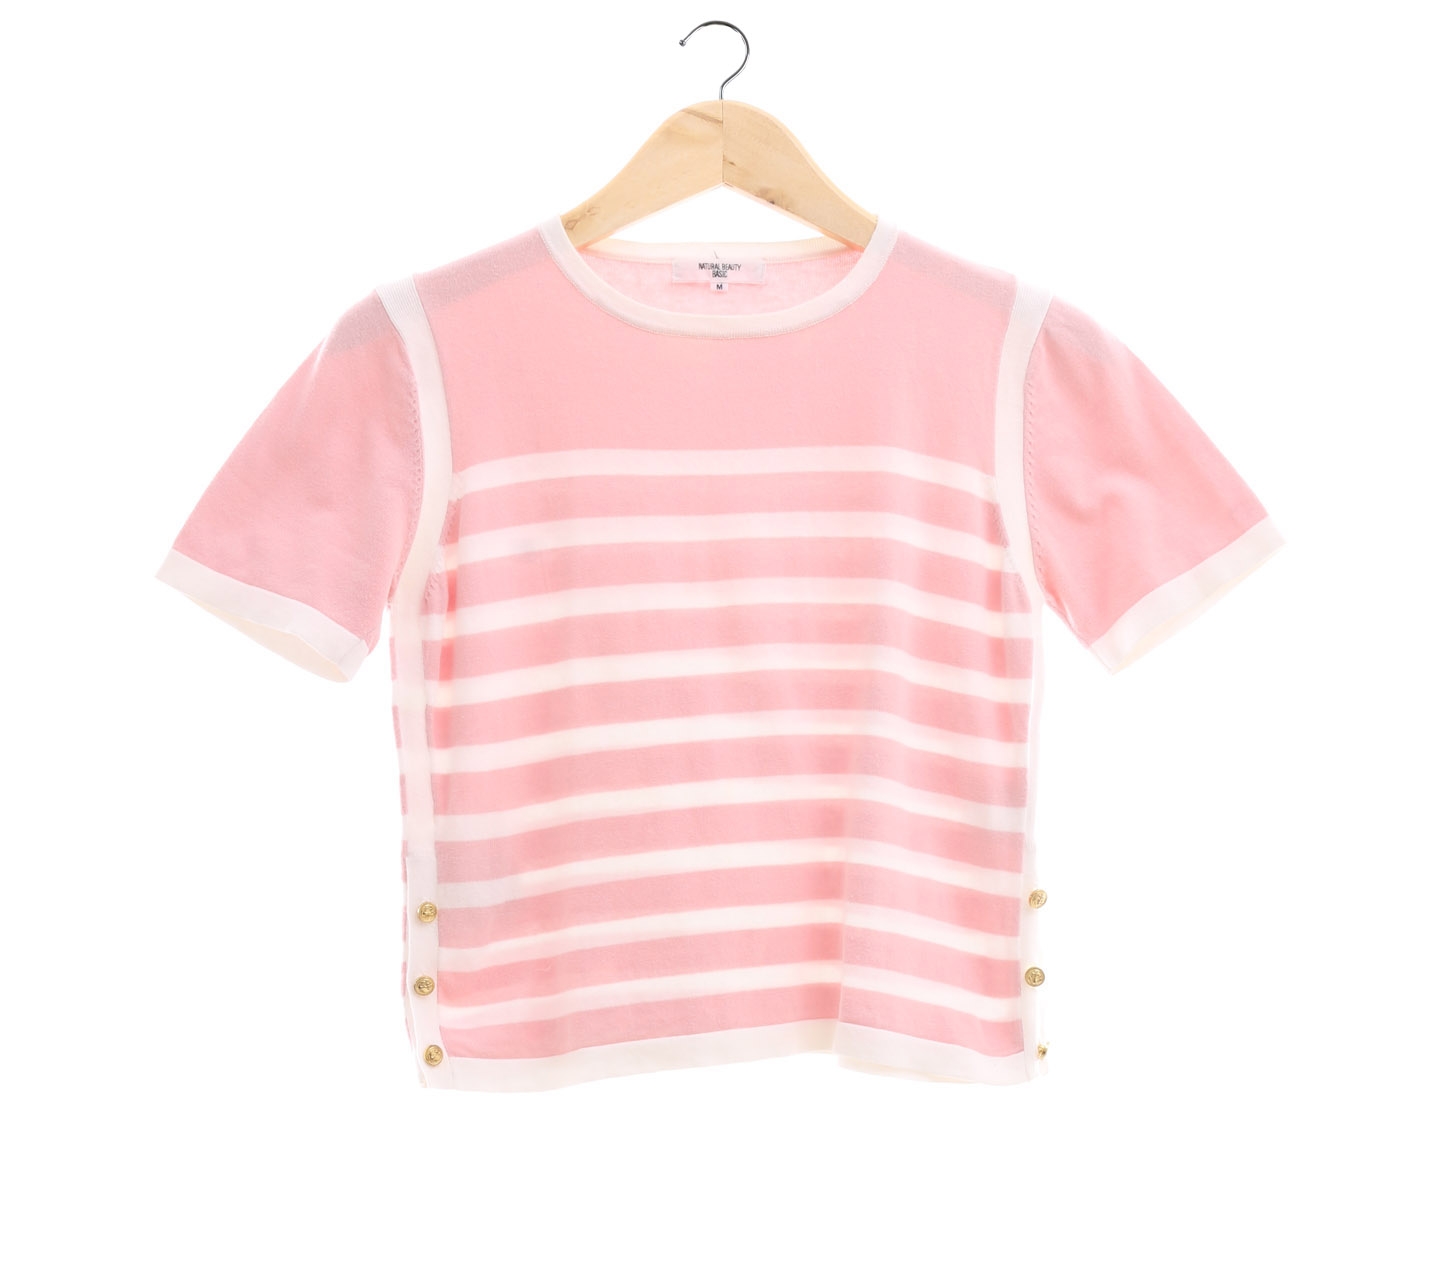 Natural Beauty Basic Pink & Off White Striped Blouse